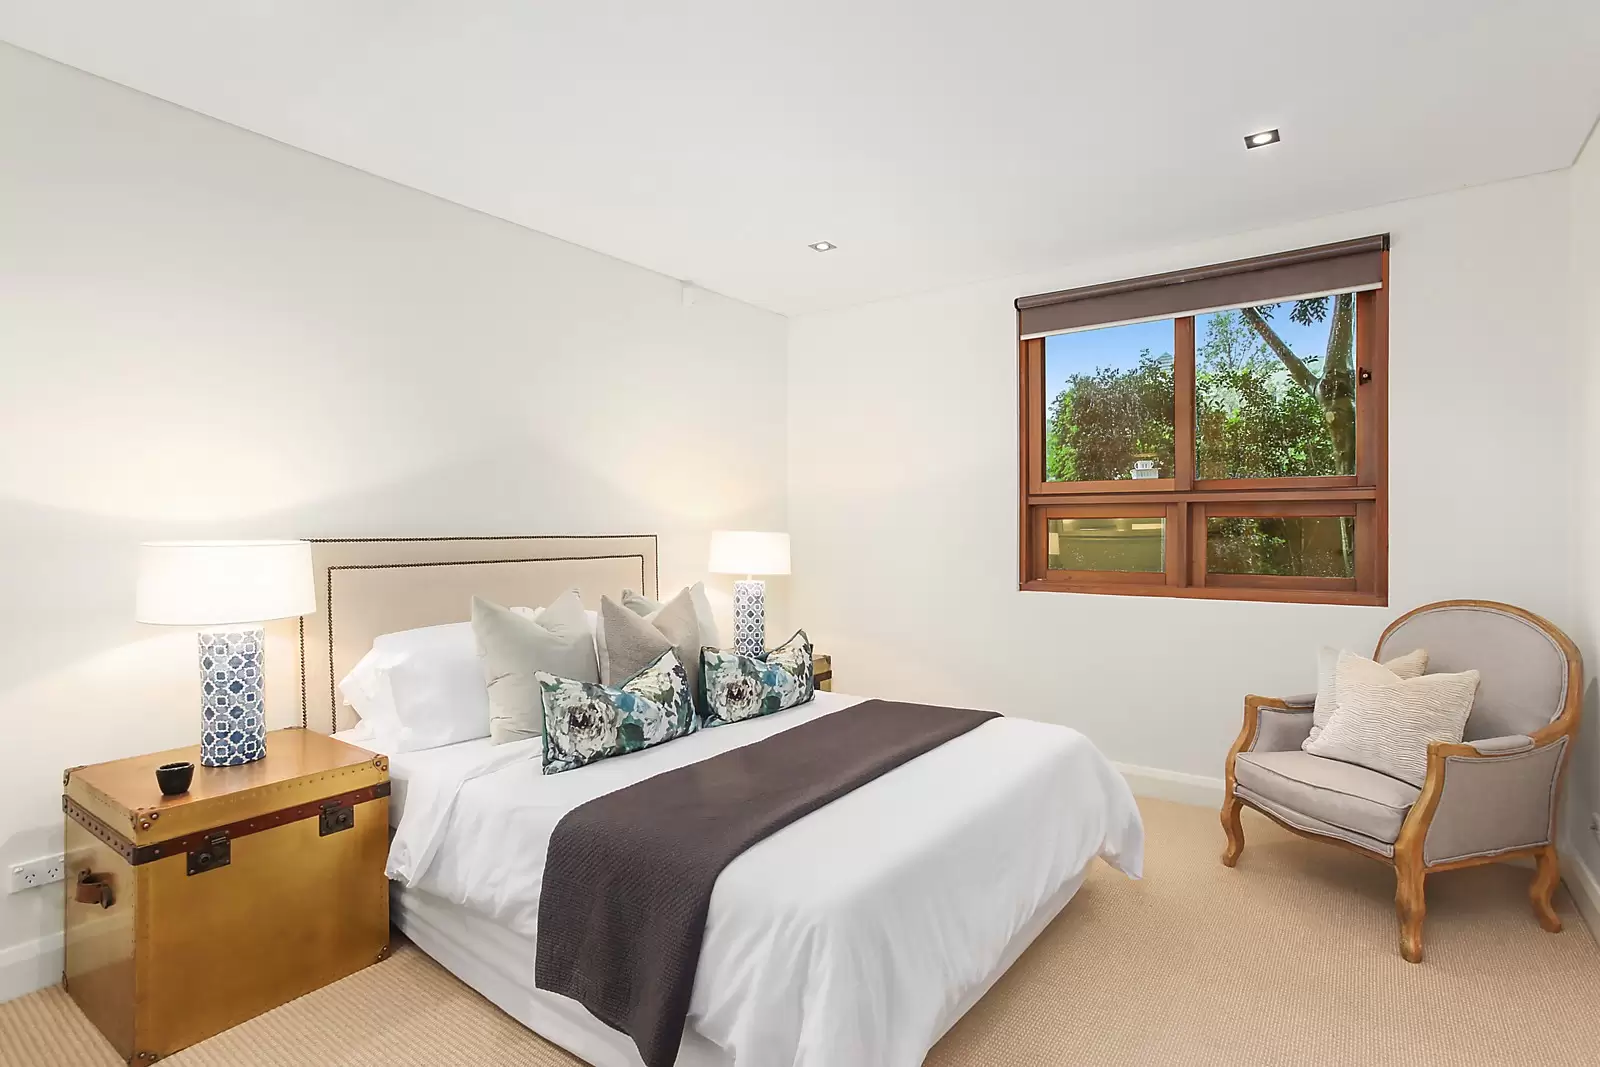 Photo #5: 4/2 Milray Street, Lindfield - Sold by Sydney Sotheby's International Realty